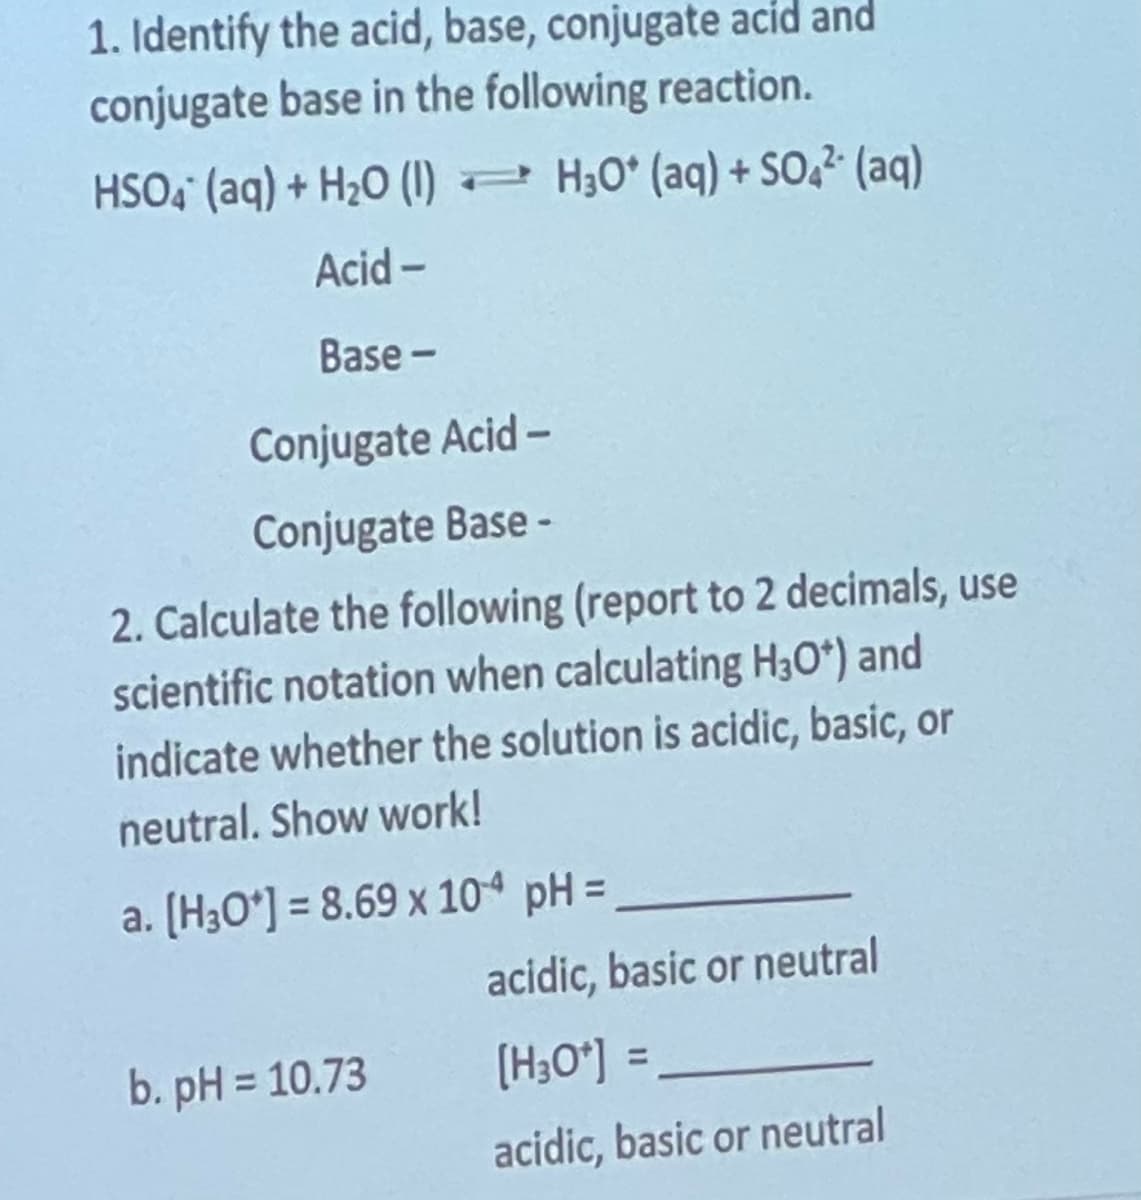 1. Identify the acid, base, conjugate acid and
conjugate base in the following reaction.
HSO4 (aq) + H₂O (1) H3O* (aq) + SO4² (aq)
Acid-
Base-
Conjugate Acid -
Conjugate Base -
2. Calculate the following (report to 2 decimals, use
scientific notation when calculating H30*) and
indicate whether the solution is acidic, basic, or
neutral. Show work!
a. [H3O*] = 8.69 x 104 pH =
b. pH = 10.73
acidic, basic or neutral
[H3O*] =
acidic, basic or neutral